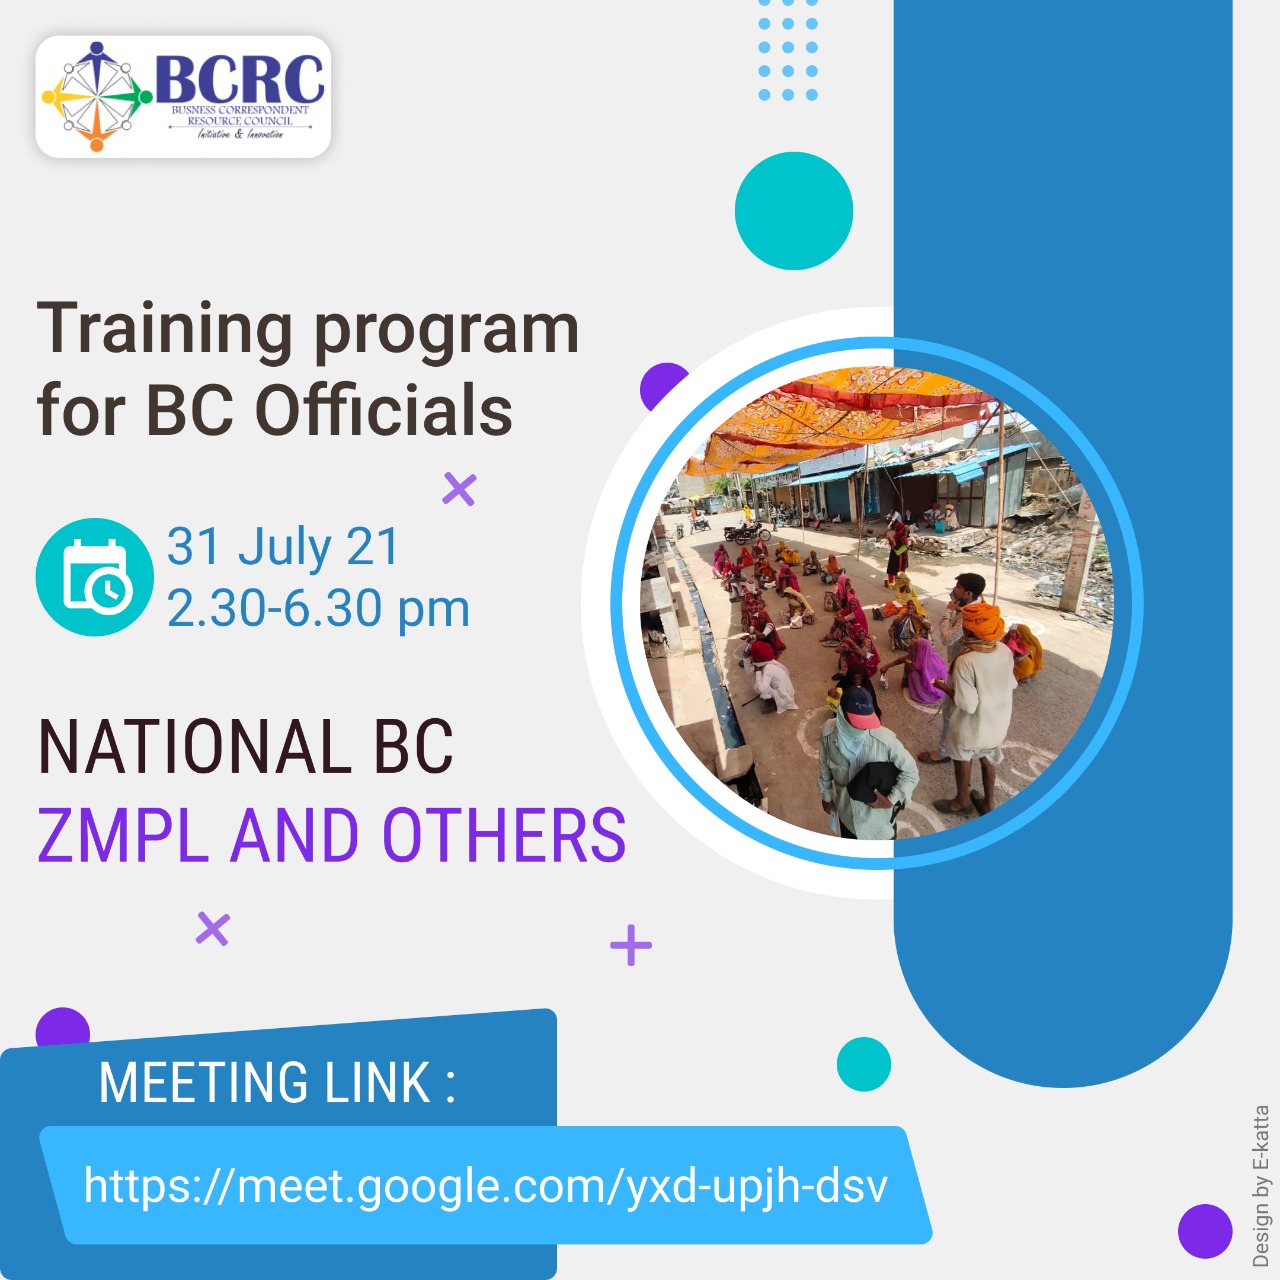 Training program was conducted for officials of national BC, ZMPL (Zero Mass)